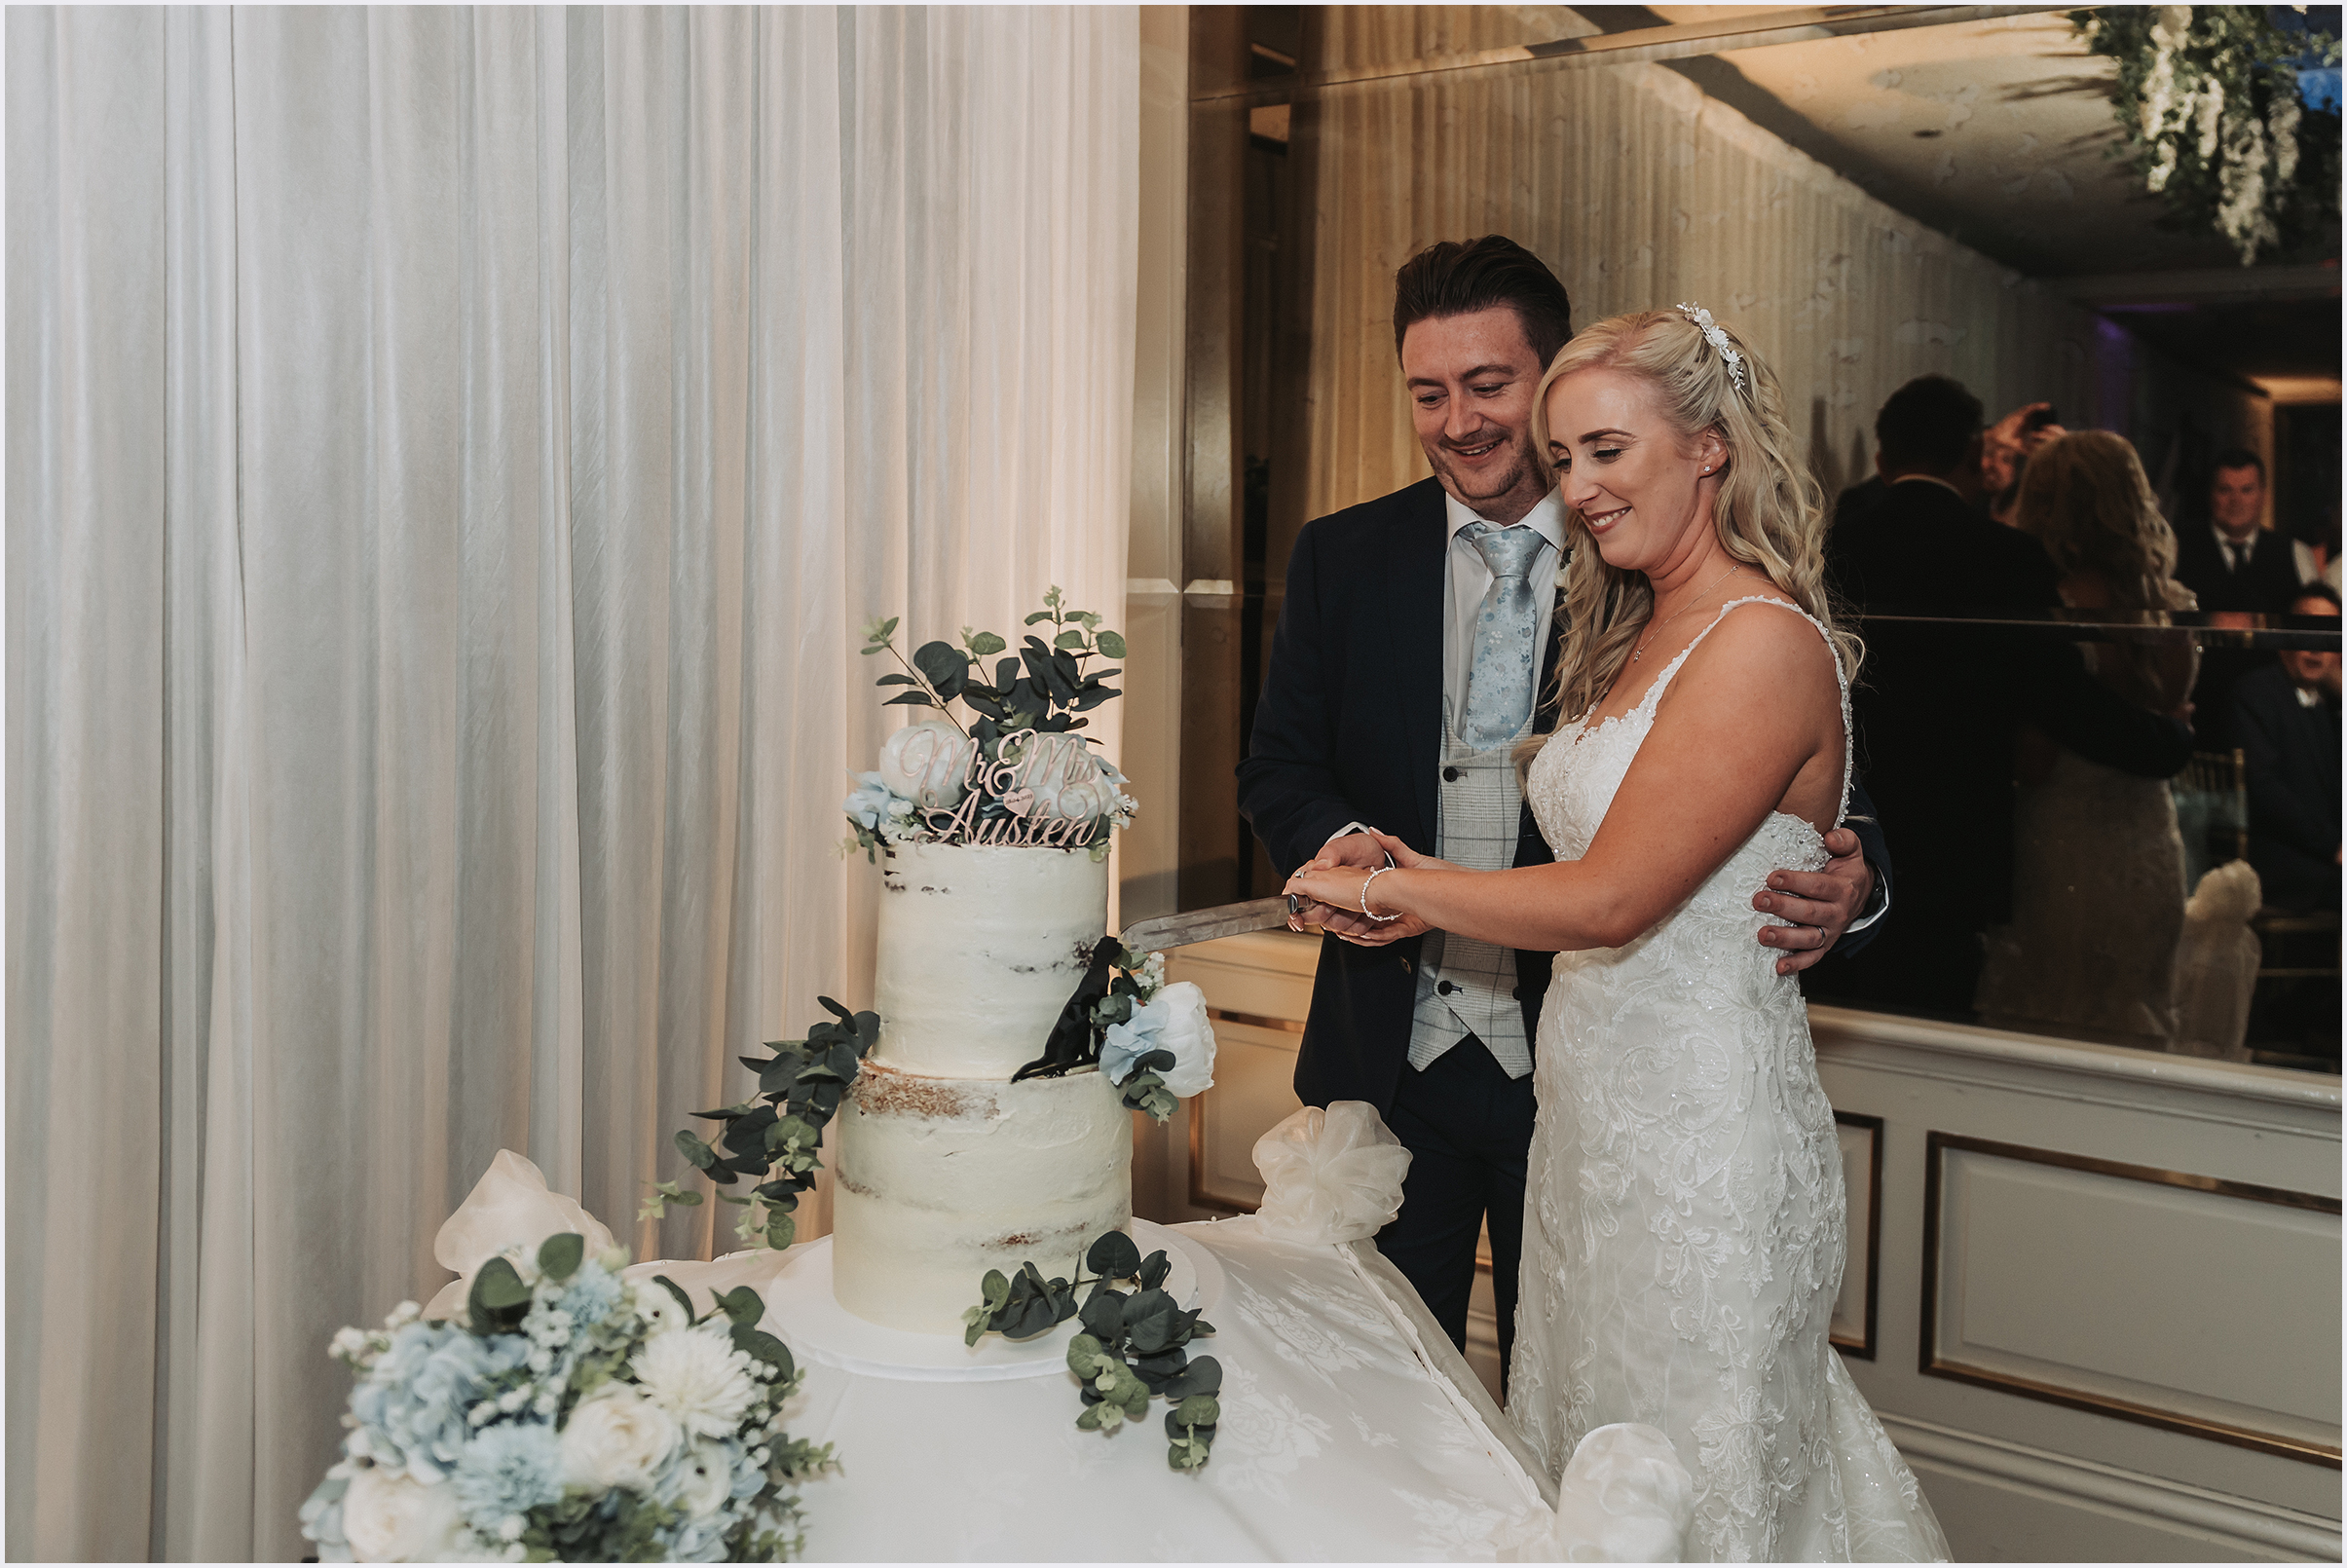 Bride and groom cutting the cake during their evening reception at The Grosvenor Pulford Hotel and Spa.